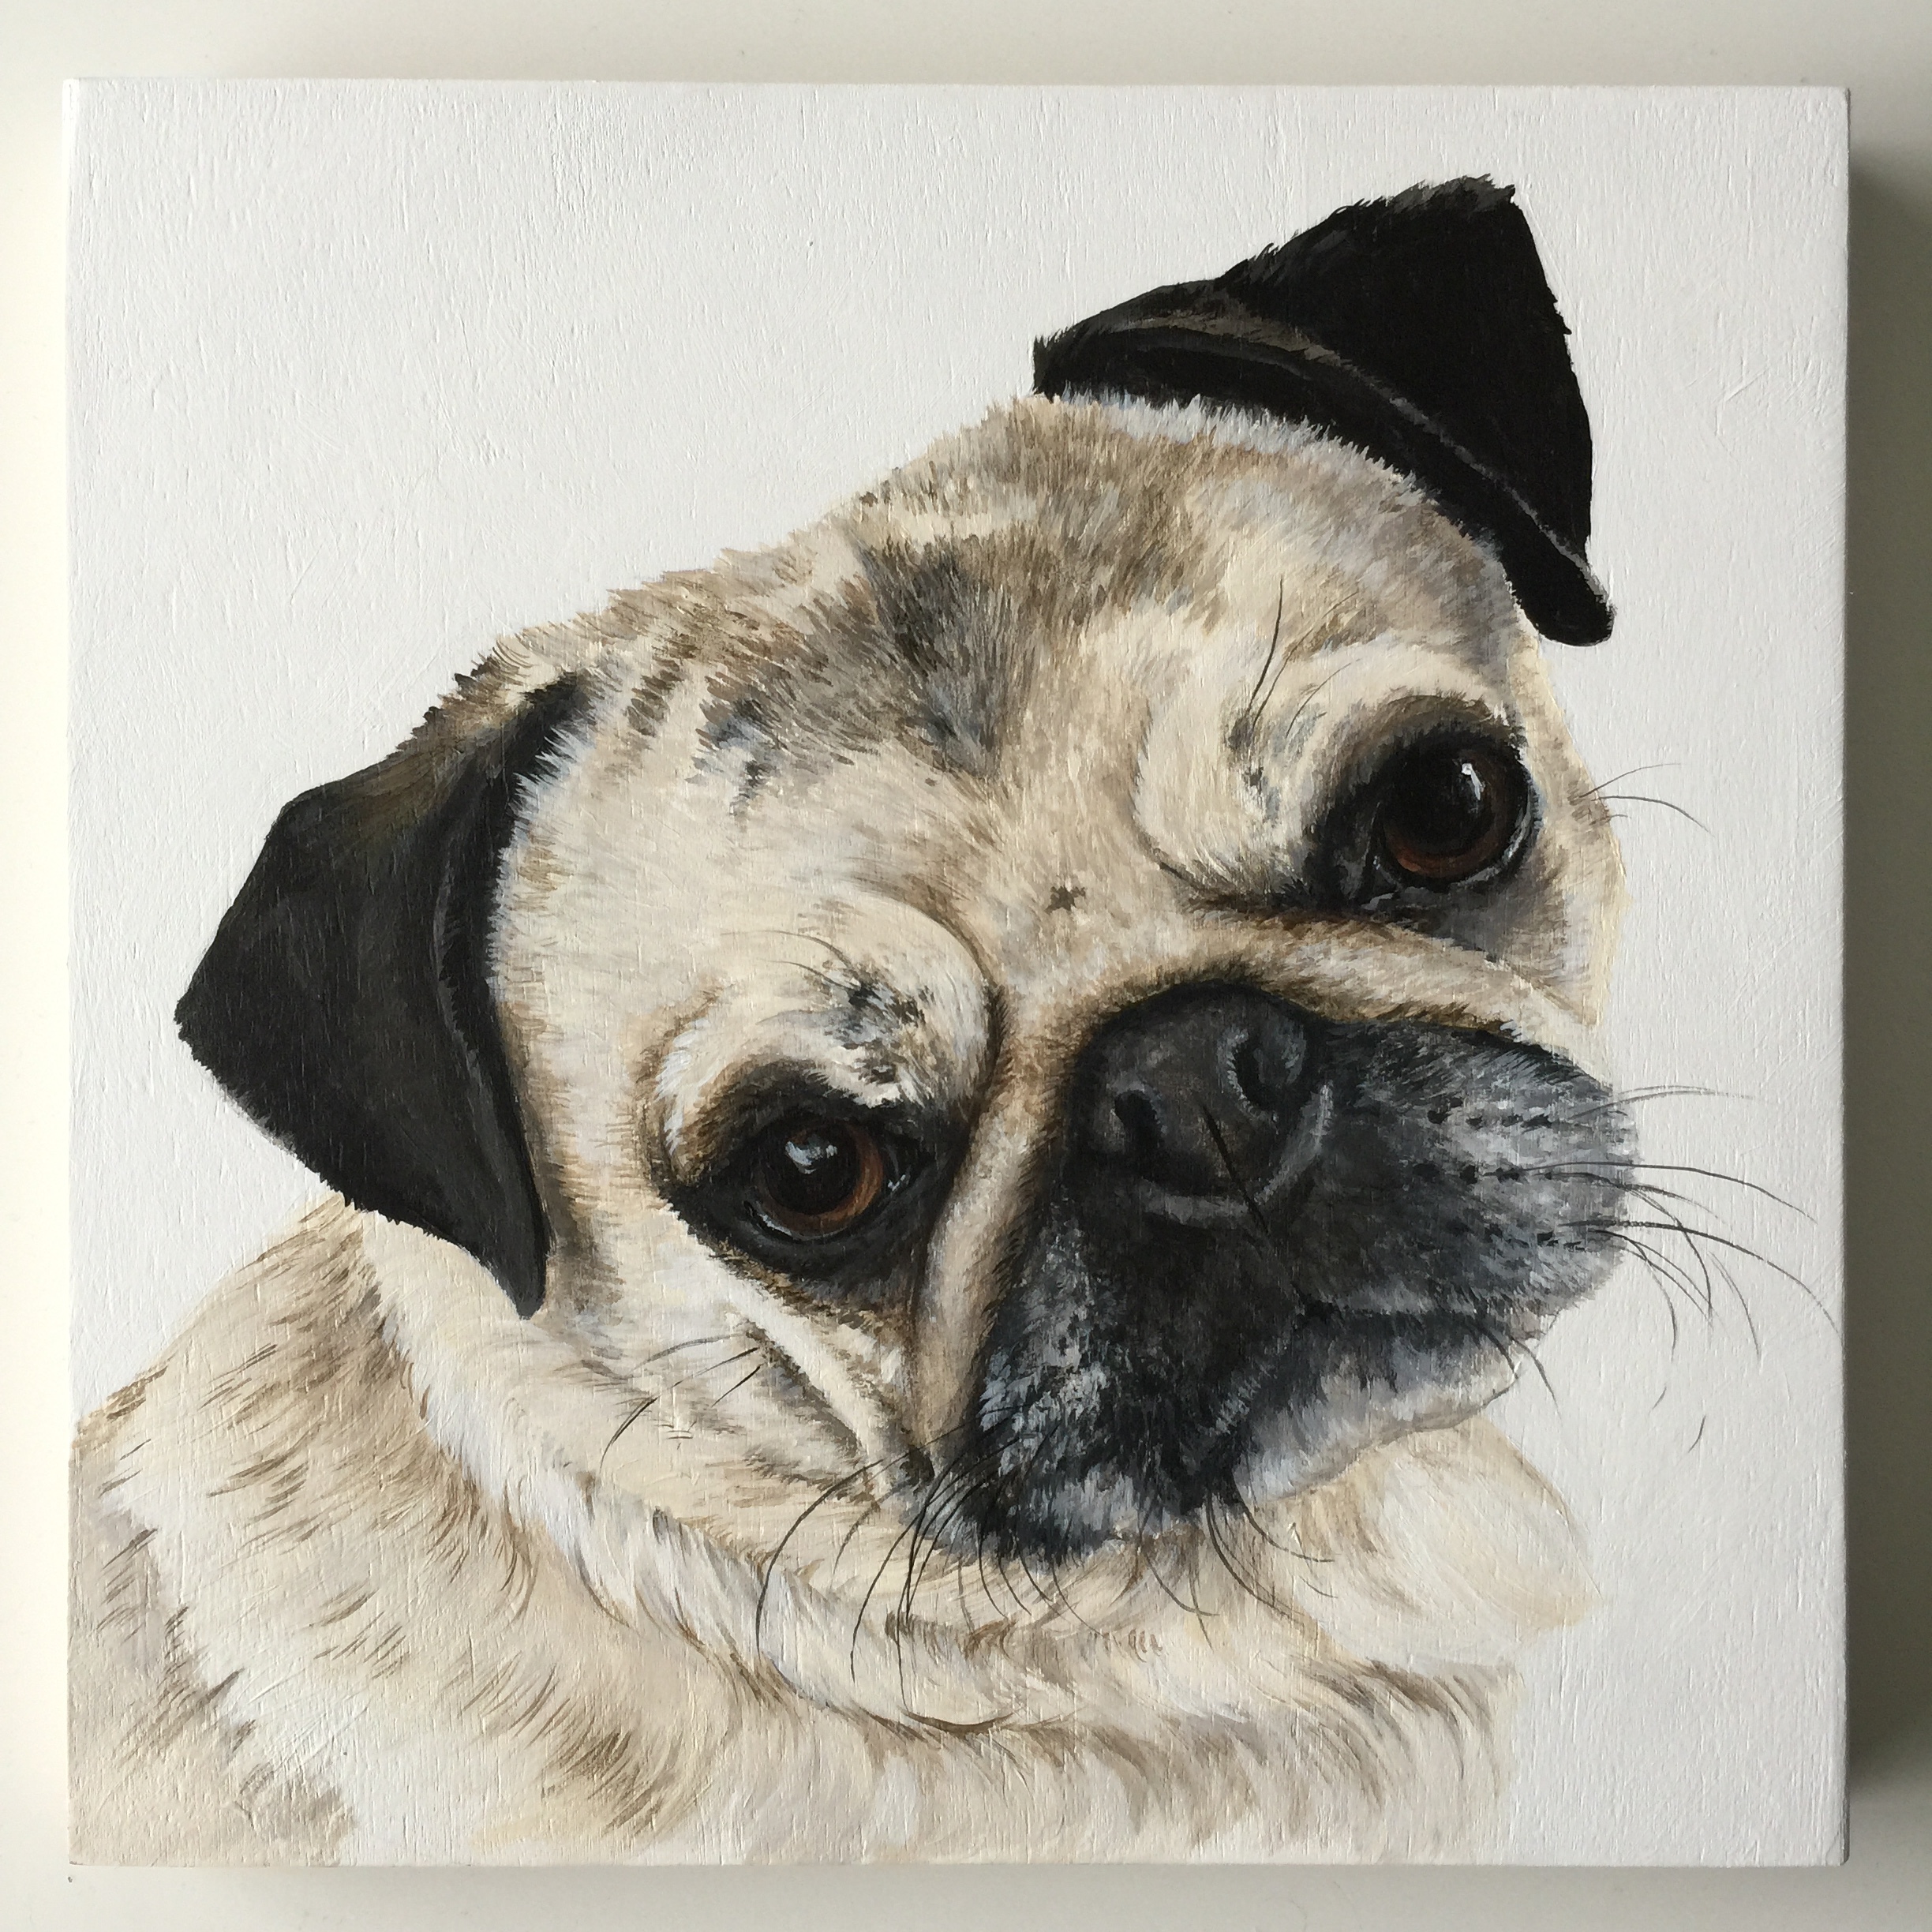  Meadow the Pug - commissioned by Liz 